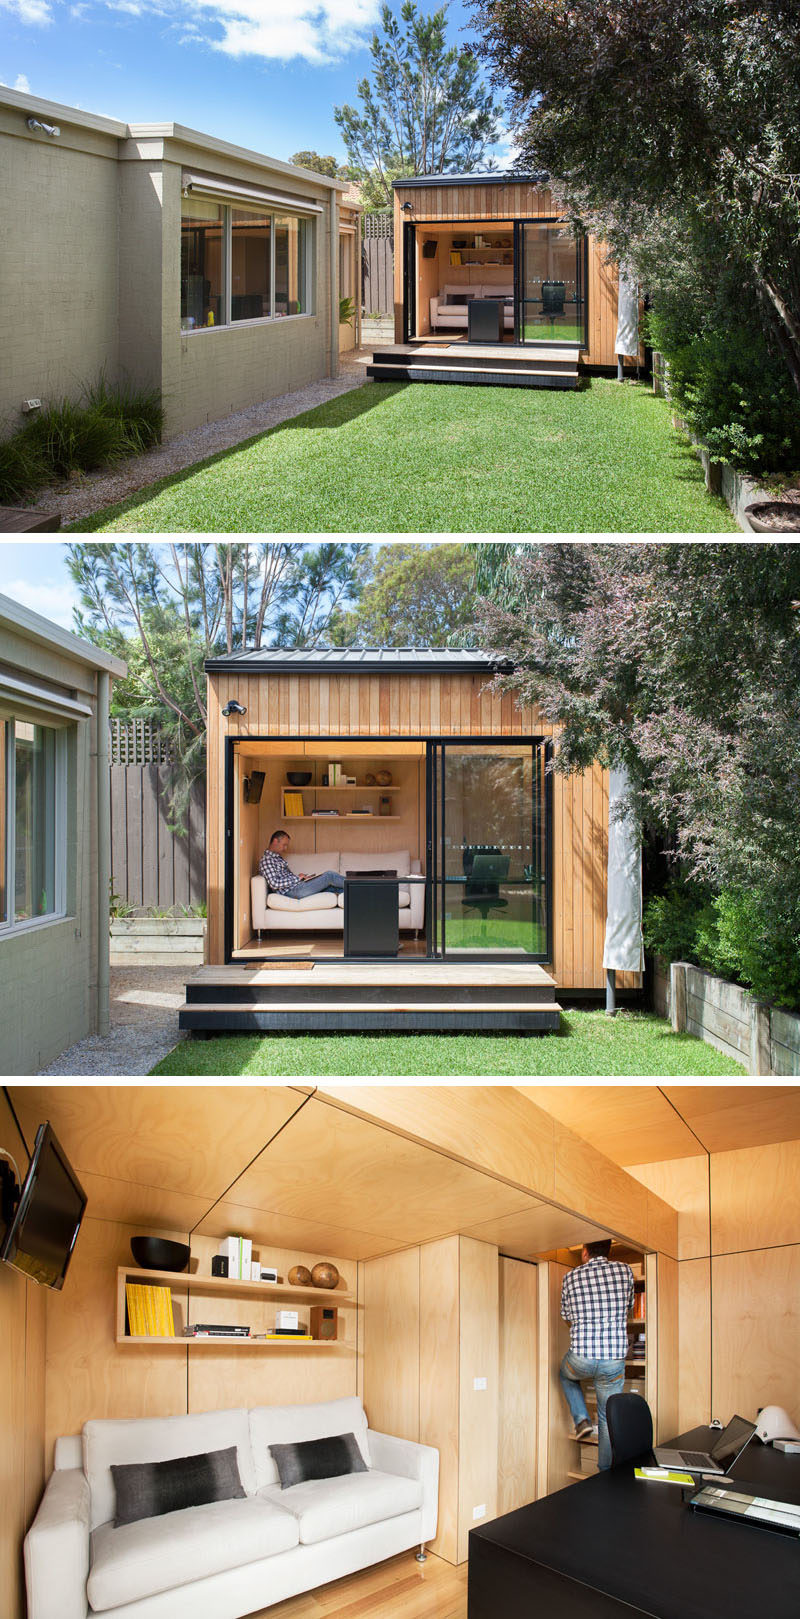 14 Inspirational Backyard Offices, Studios And Guest 